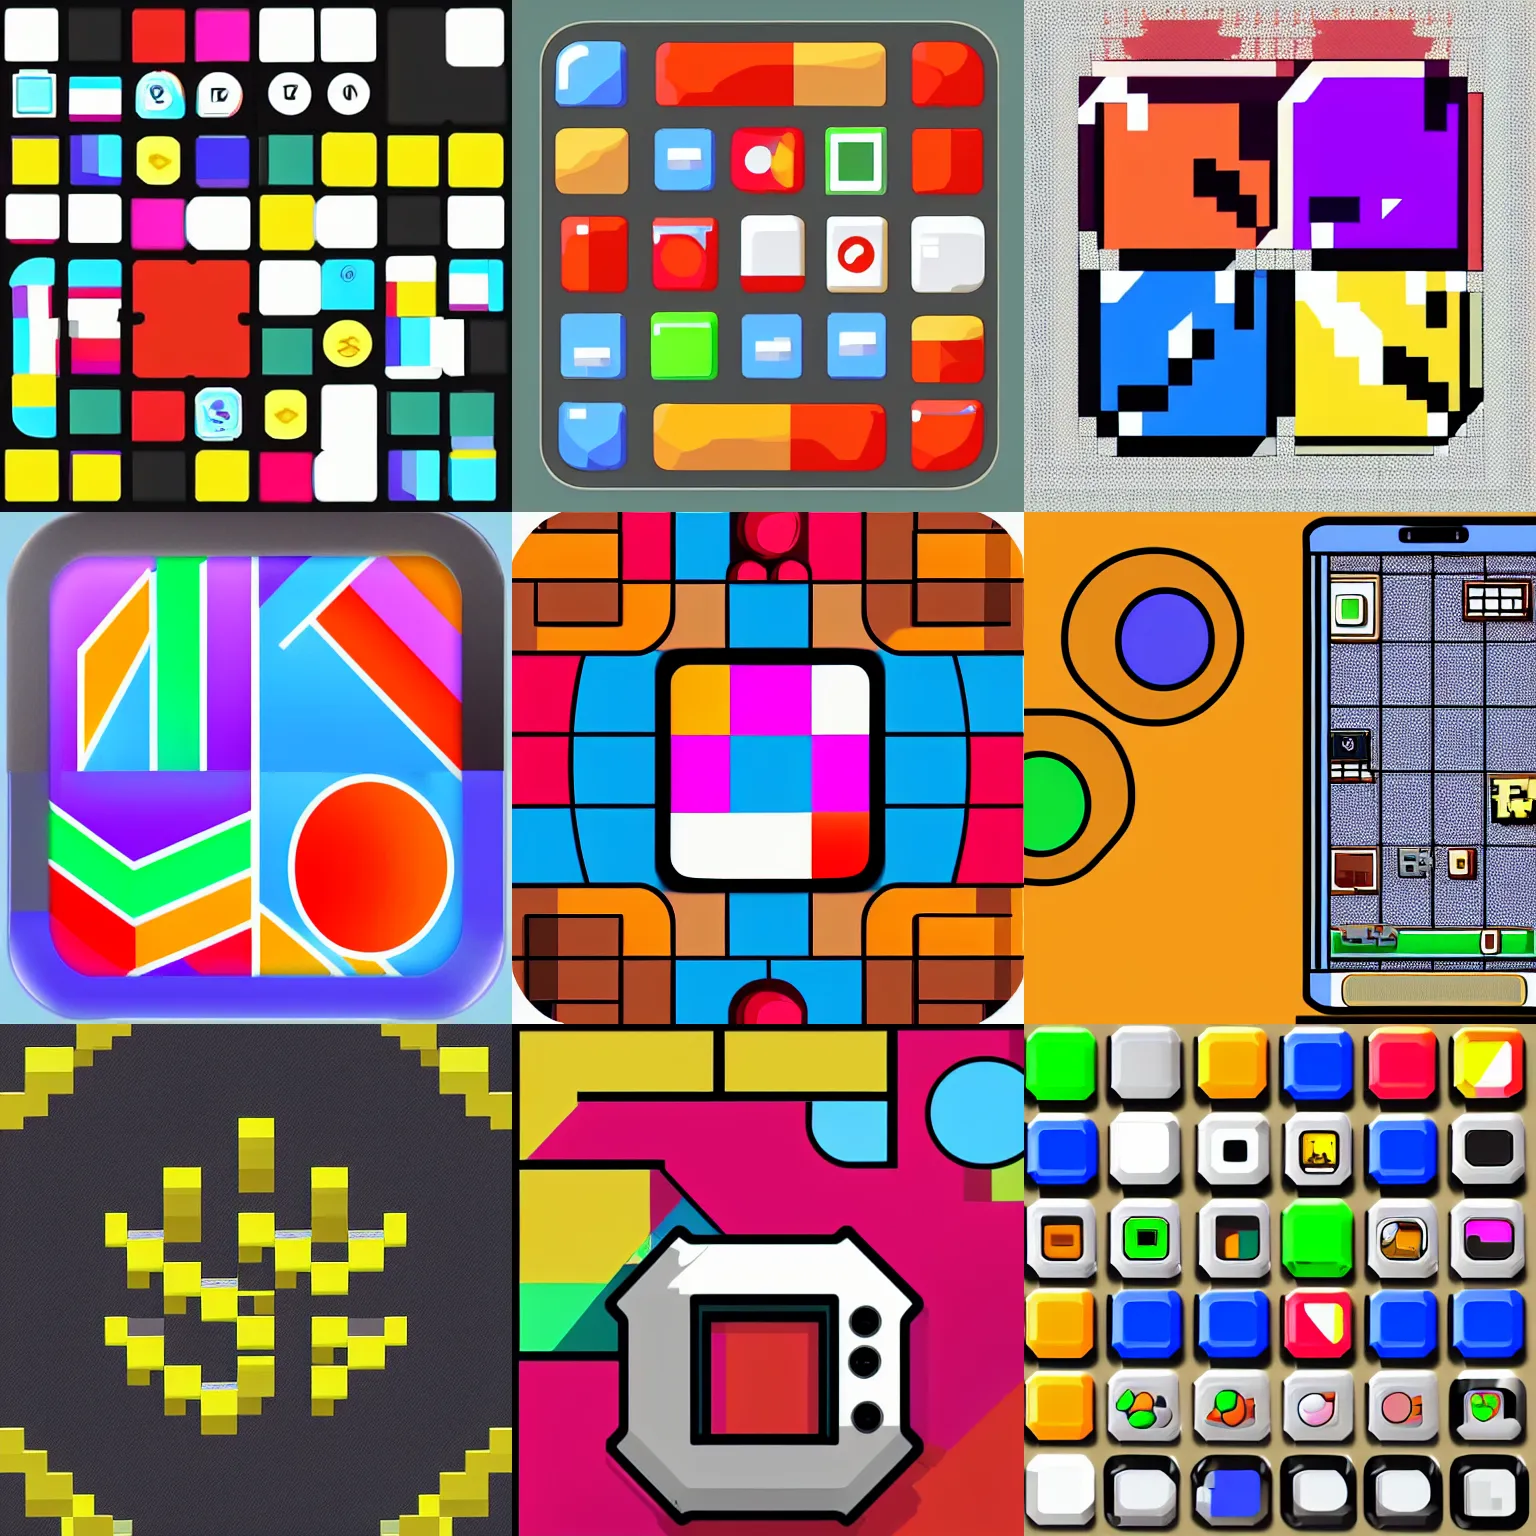 Prompt: square with round beveled edges. glossy. digital art. character, scene, situation, setting. homescreen app icon. pixel - art iphone android phone app icon. designed by the artists at sega, nintendo, namco, capcom, sony, xbox, microsoft, apple, google play store.